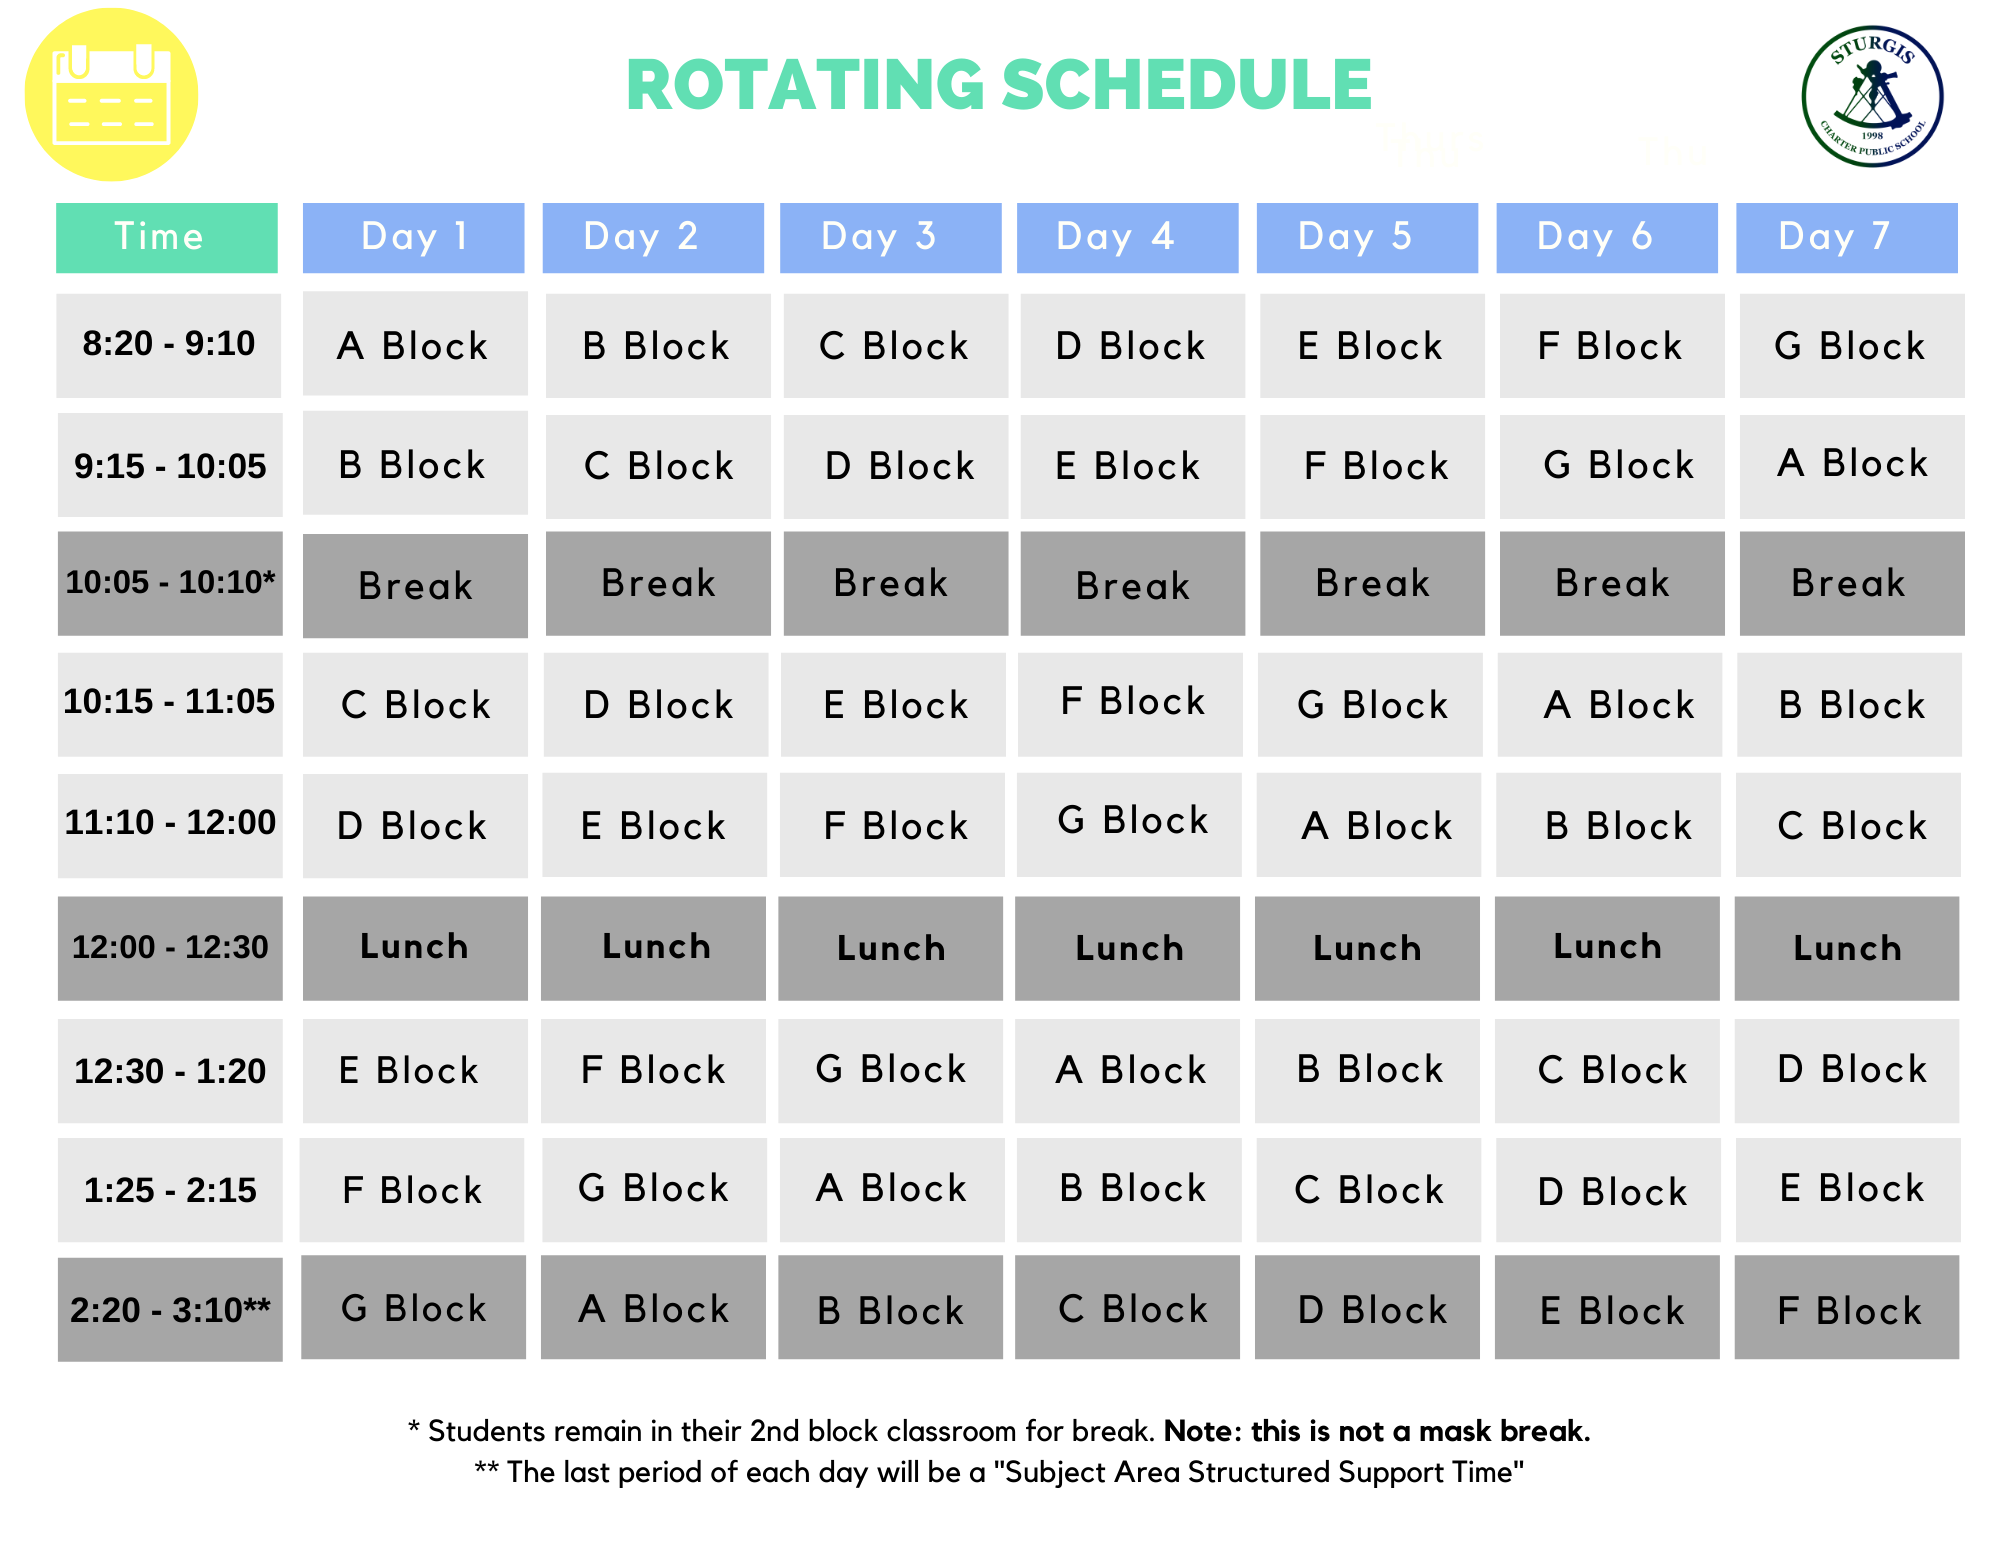 Rotating 7 Day Schedule. Classes are 50 minutes in length, and every class meets daily, beginning at 8:20AM. There is a break from 10:05-10:10 and this is not a mask break. Lunch is 30 minutes and is from 12-12:30PM. ** The last period of each day (2:20-3:10) will be a “Subject Area Structured Support Time” This time is for supplemental support, 1-1 extra help, and/or independent work on that subject’s assignments Students attend their regularly scheduled class during last block; attendance will be taken. No material should be presented nor assigned during this block. Remote learners are expected to sign onto the class at the start of the period. They may be dismissed to work asynchronously after checking in with the teacher. Also, students on IEPs and EL's may meet virtually with support staff during this time for that subject area. If the student is up to date on all assignments for that subject, students can work on assignments for other classes, with teacher approval. Screens should only be used for school-related activities (no movies, games, etc.) We will provide guidance at a later date as to whether or not students will be allowed to listen to music 